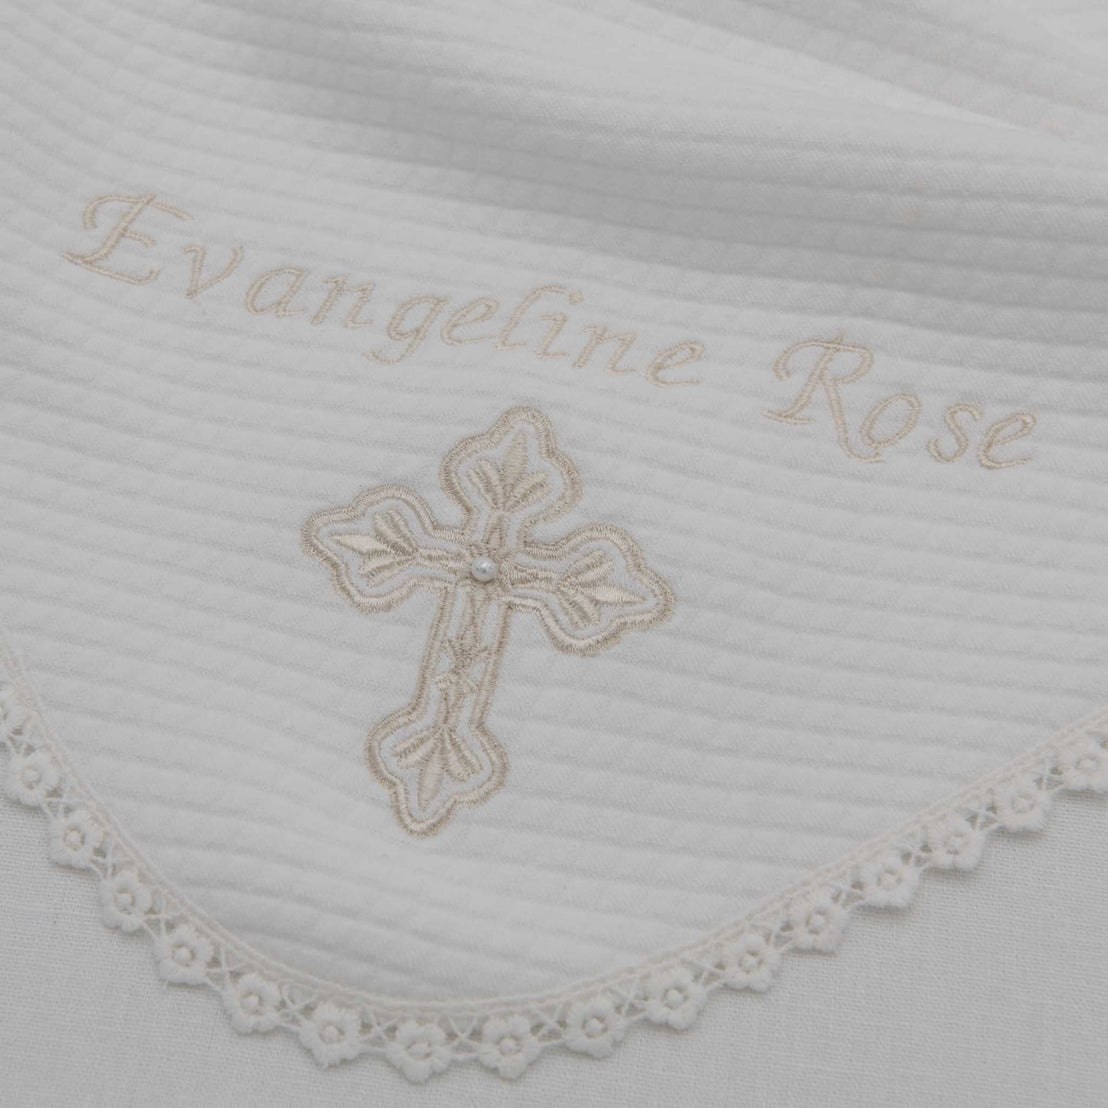 A close-up of a white fabric with the embroidered name "evangeline rose" and a delicate gold cross for a christening, surrounded by a lace trim edge on the Personalized Cross Blanket.